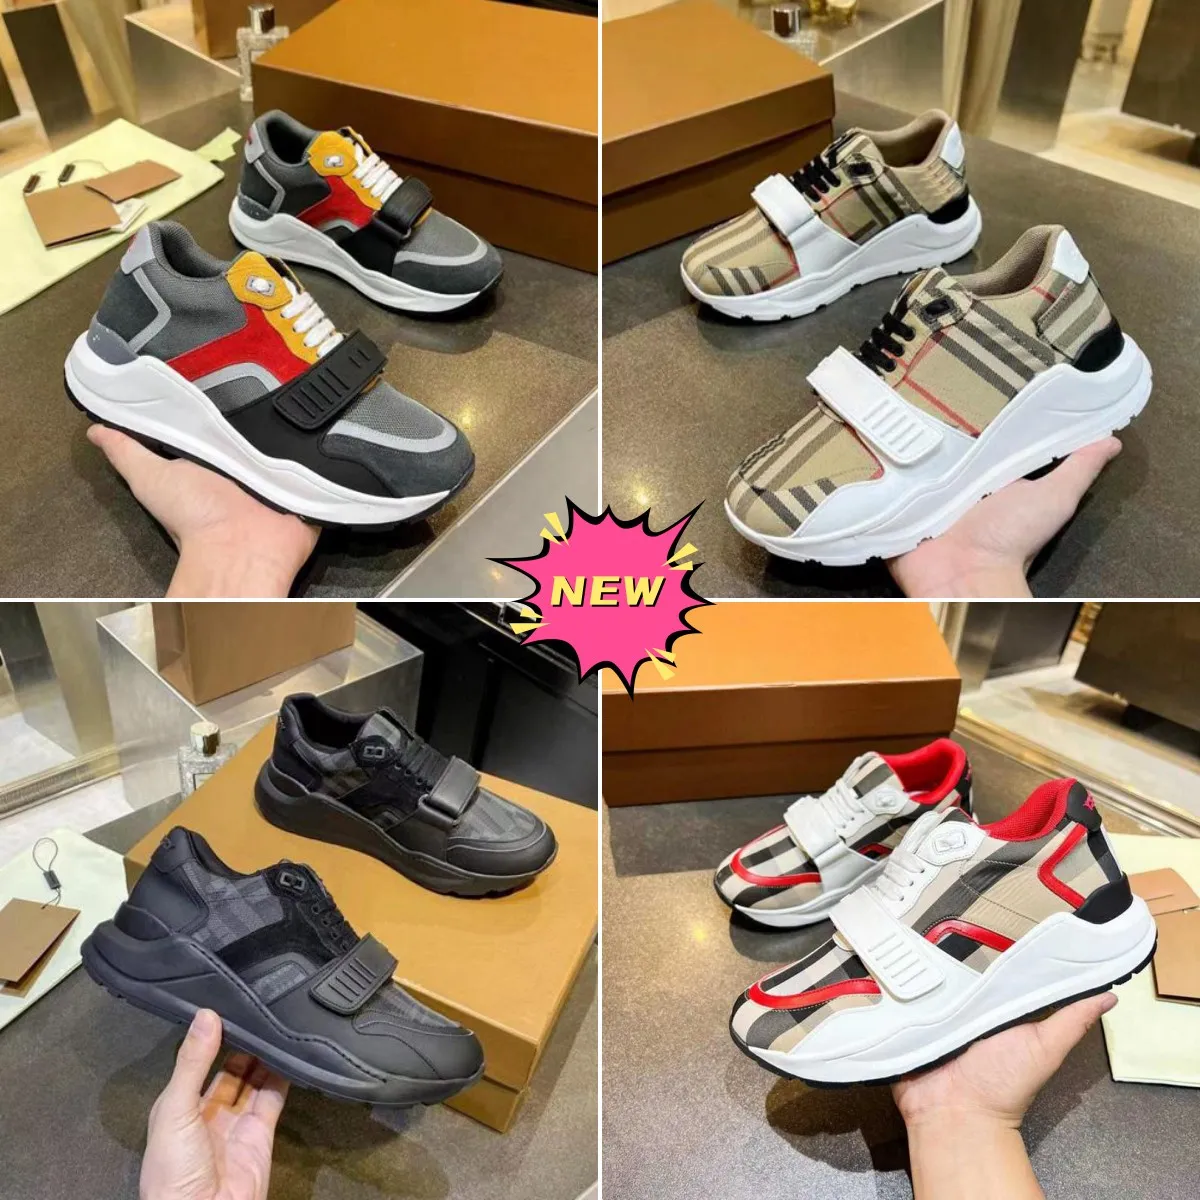 Designer Check Cotton Sneakers Rayas Zapatos casuales Hombres Mujeres Vintage Sneaker Platform Trainer Season Shades Flats Trainers Brand Classic Outdoor Shoe